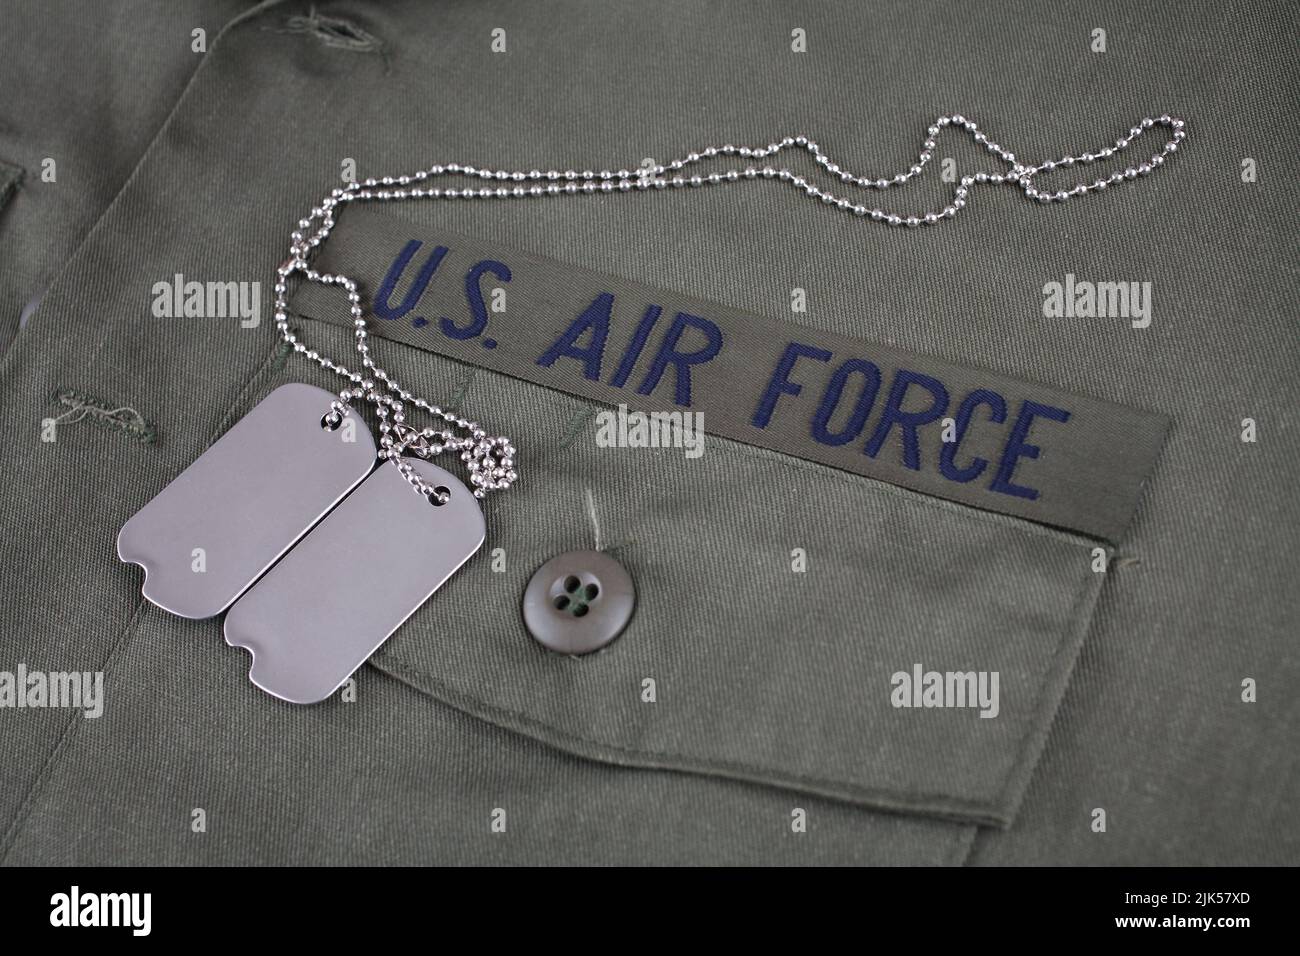 U.S. AIR FORCE Branch Tape with dog tags on olive drab uniform background Stock Photo